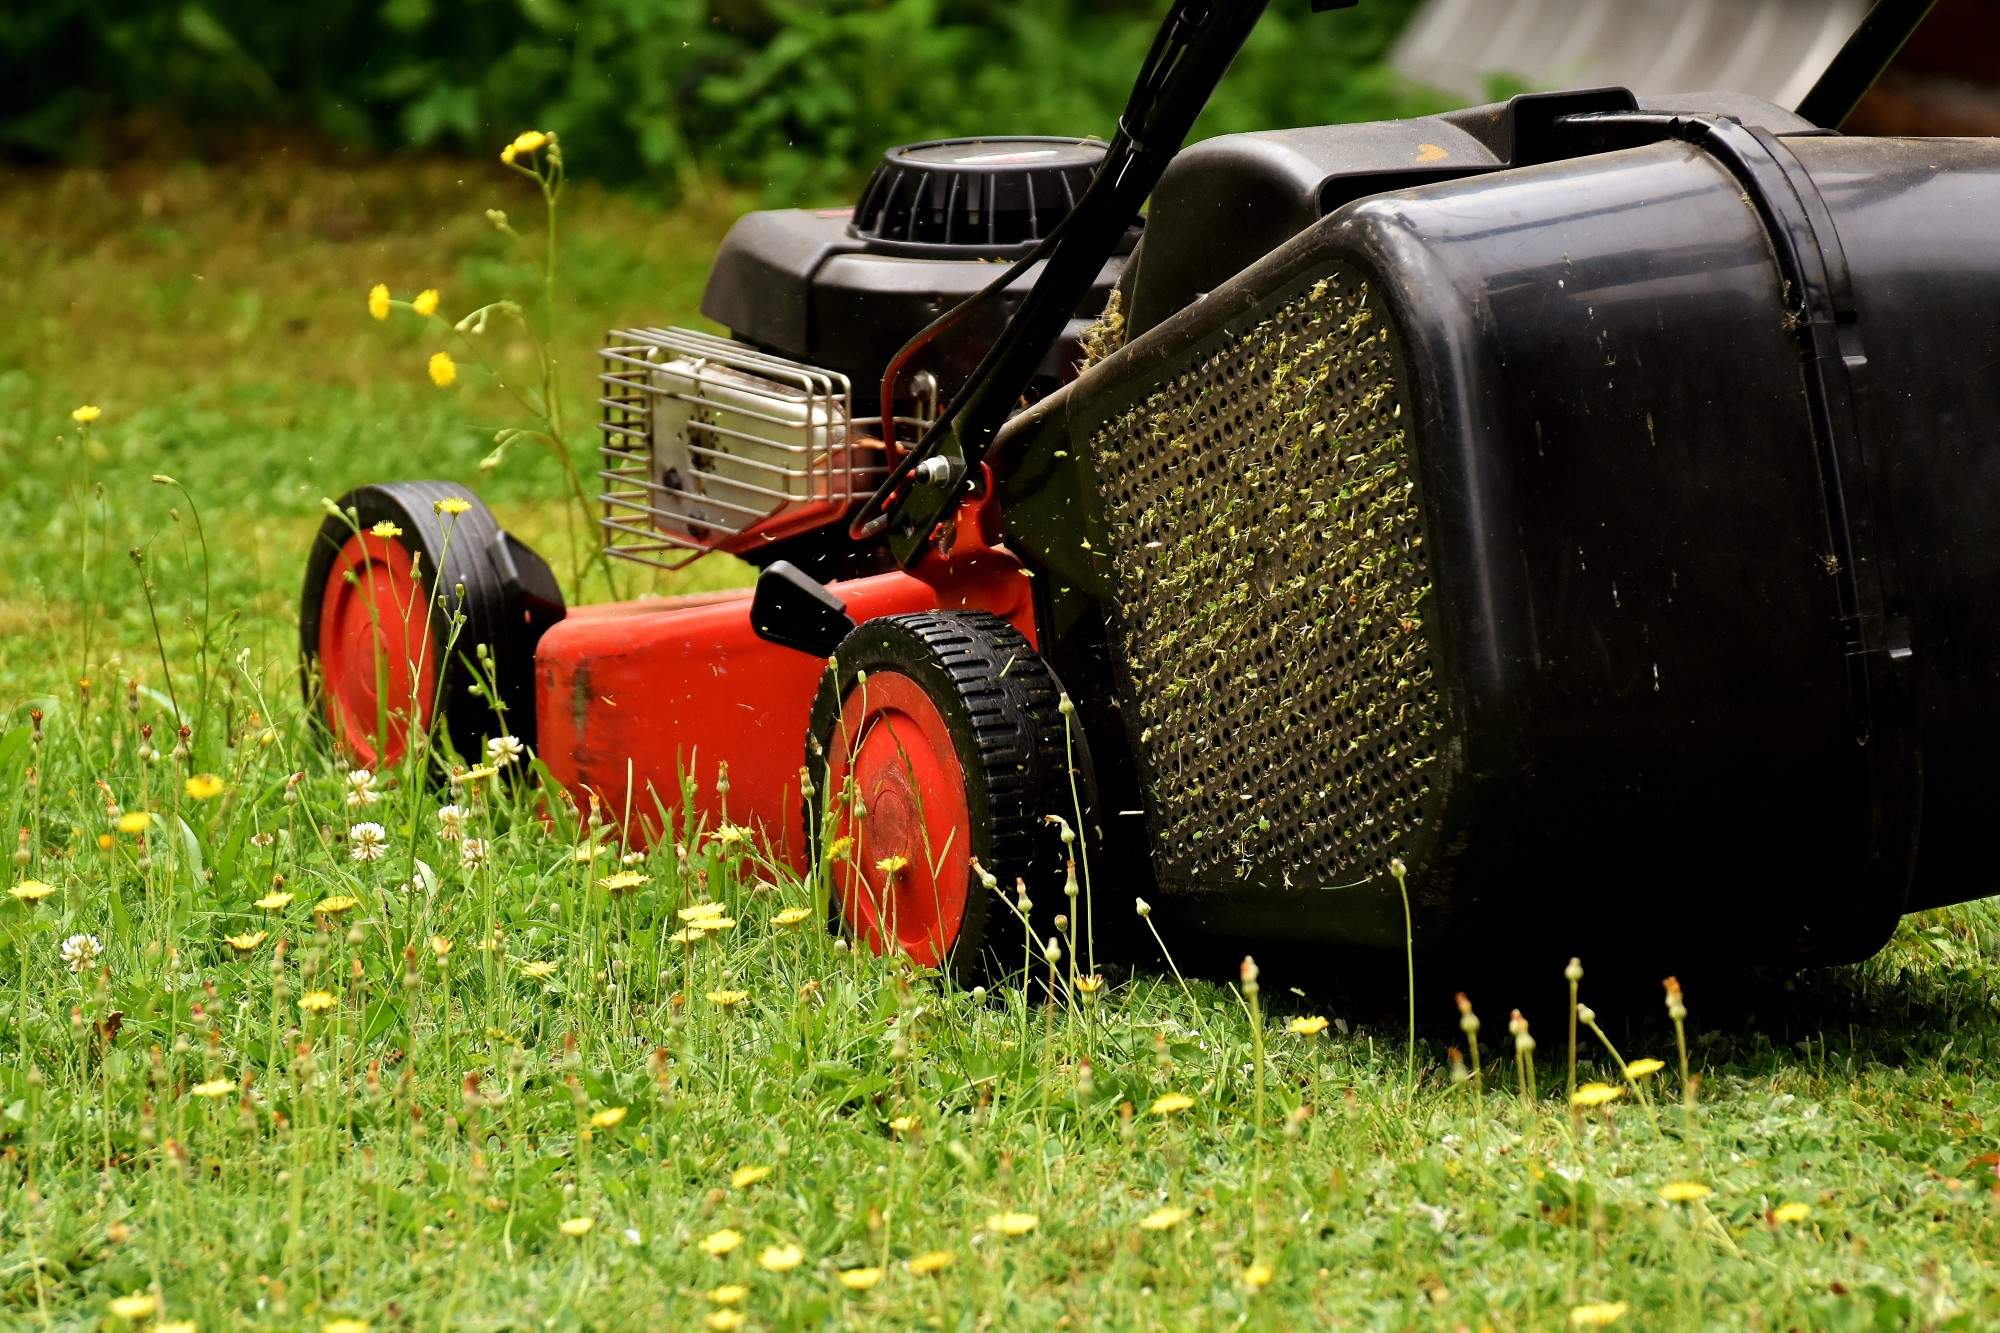 5 Lawn Mowing Tips to Keep Your Yard Looking Great